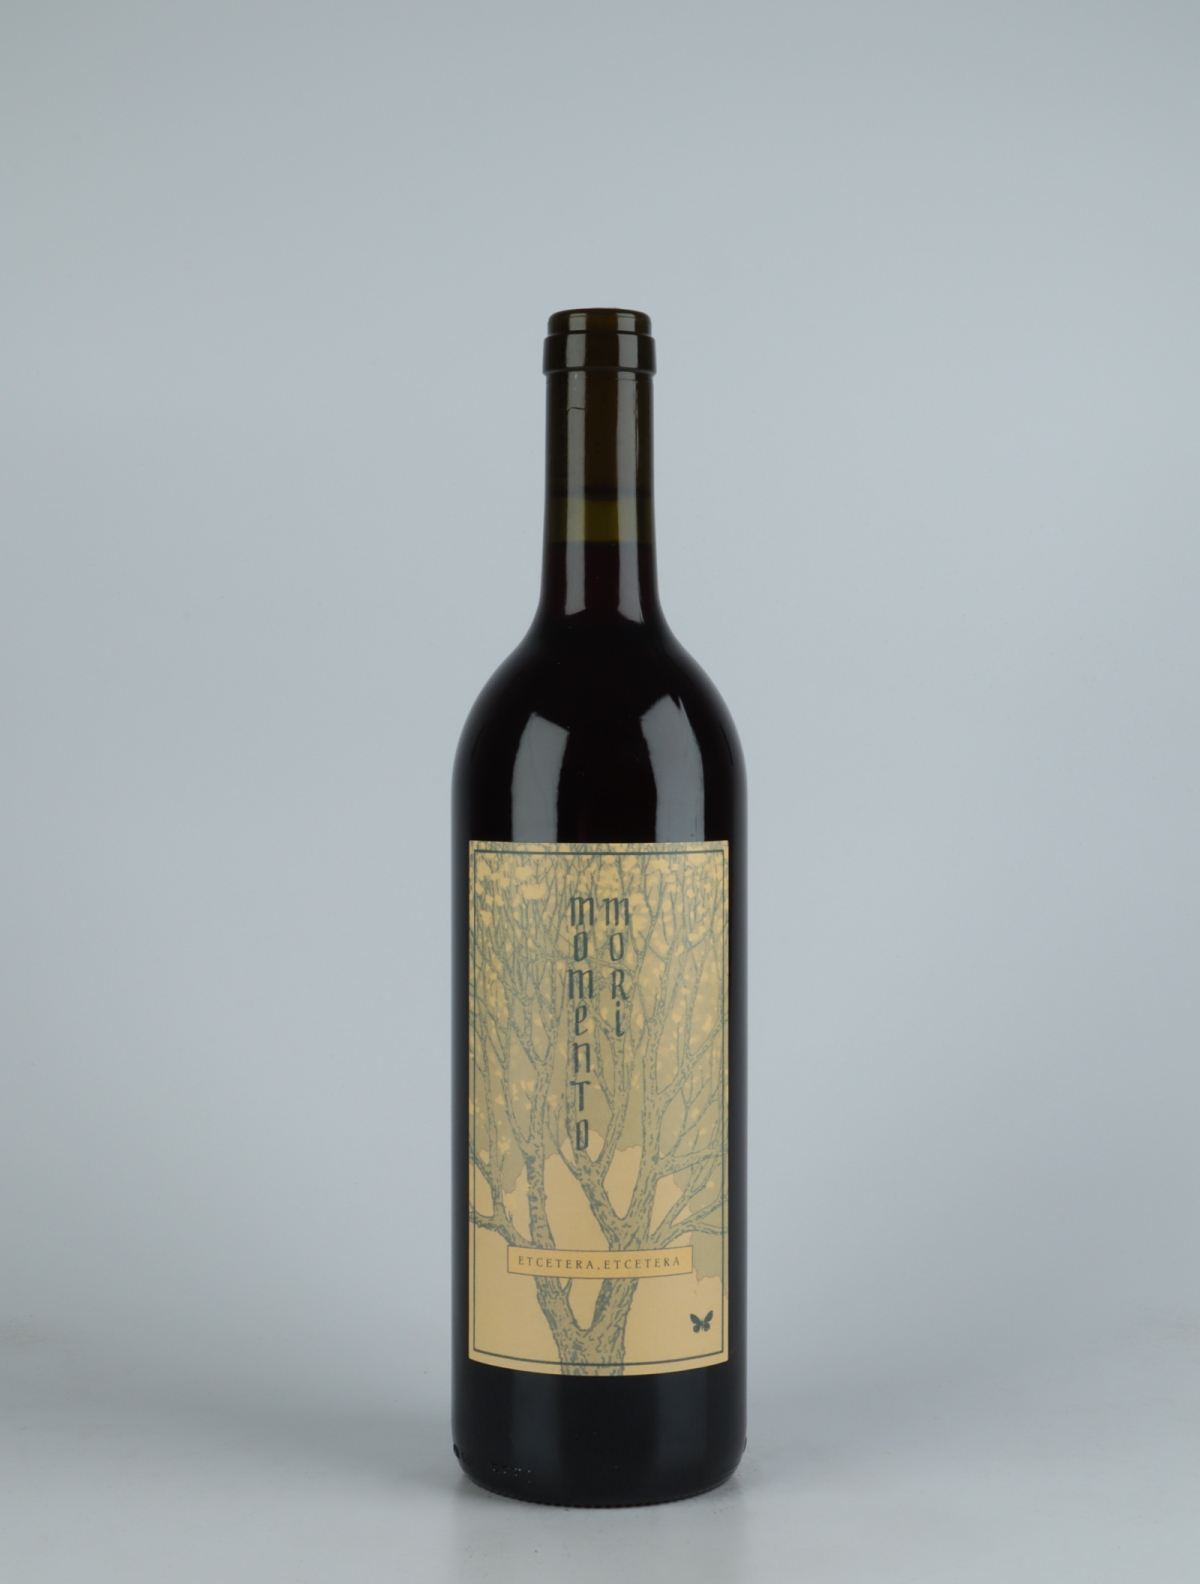 A bottle 2019 Etc Etc Red wine from Momento Mori, Victoria in 